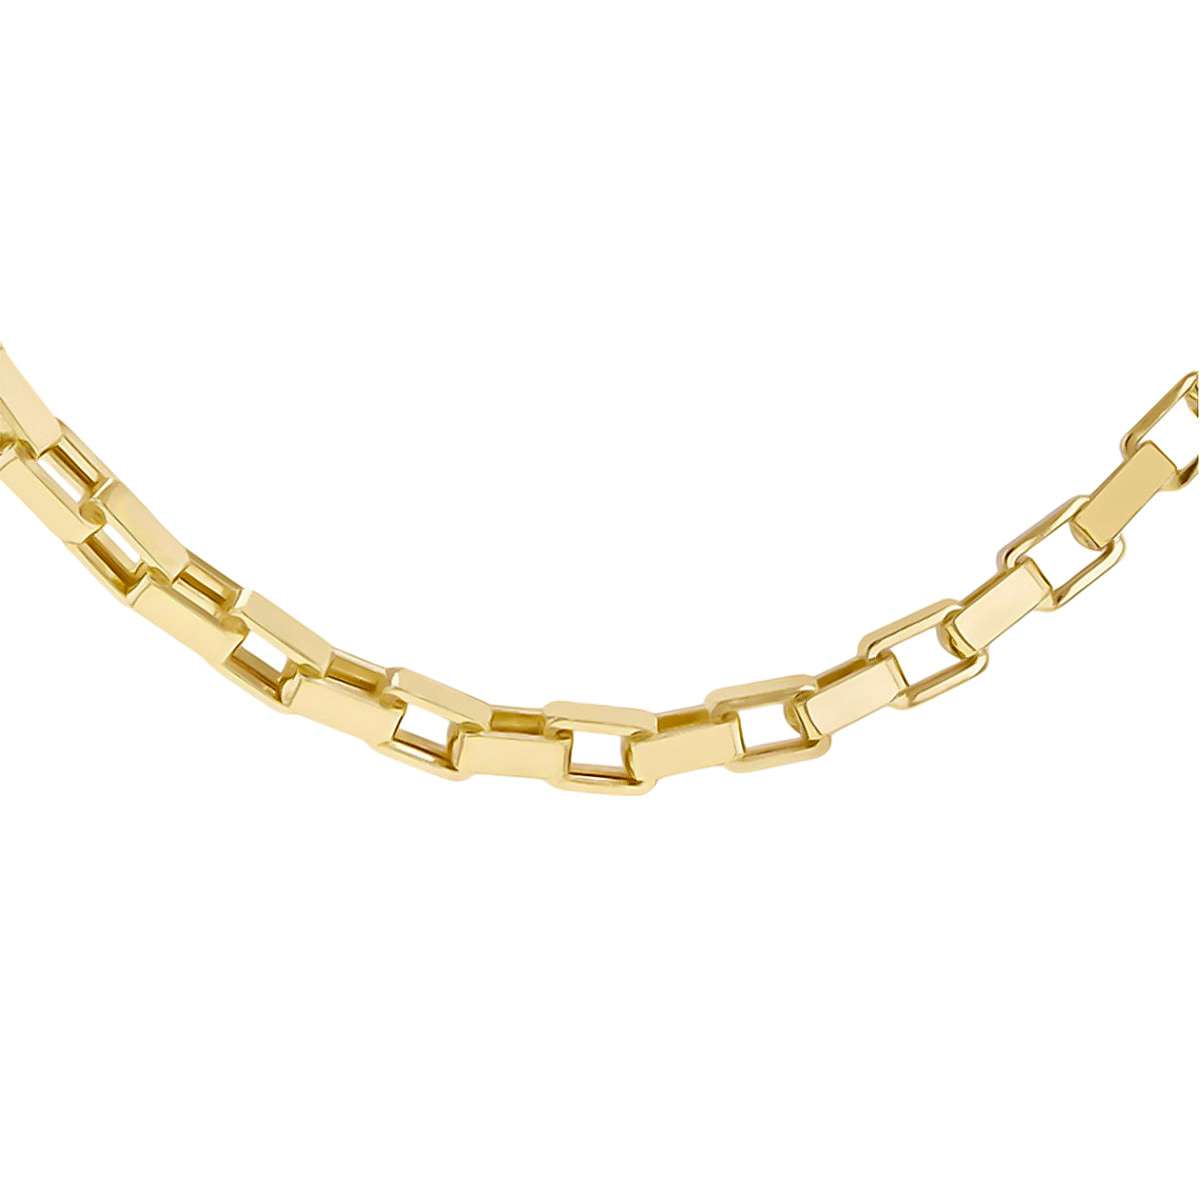 Italian Closeout Megabuy - 9K Yellow Gold Square Cable Link Necklace (Size - 20), Gold Wt. 10.70 Gms